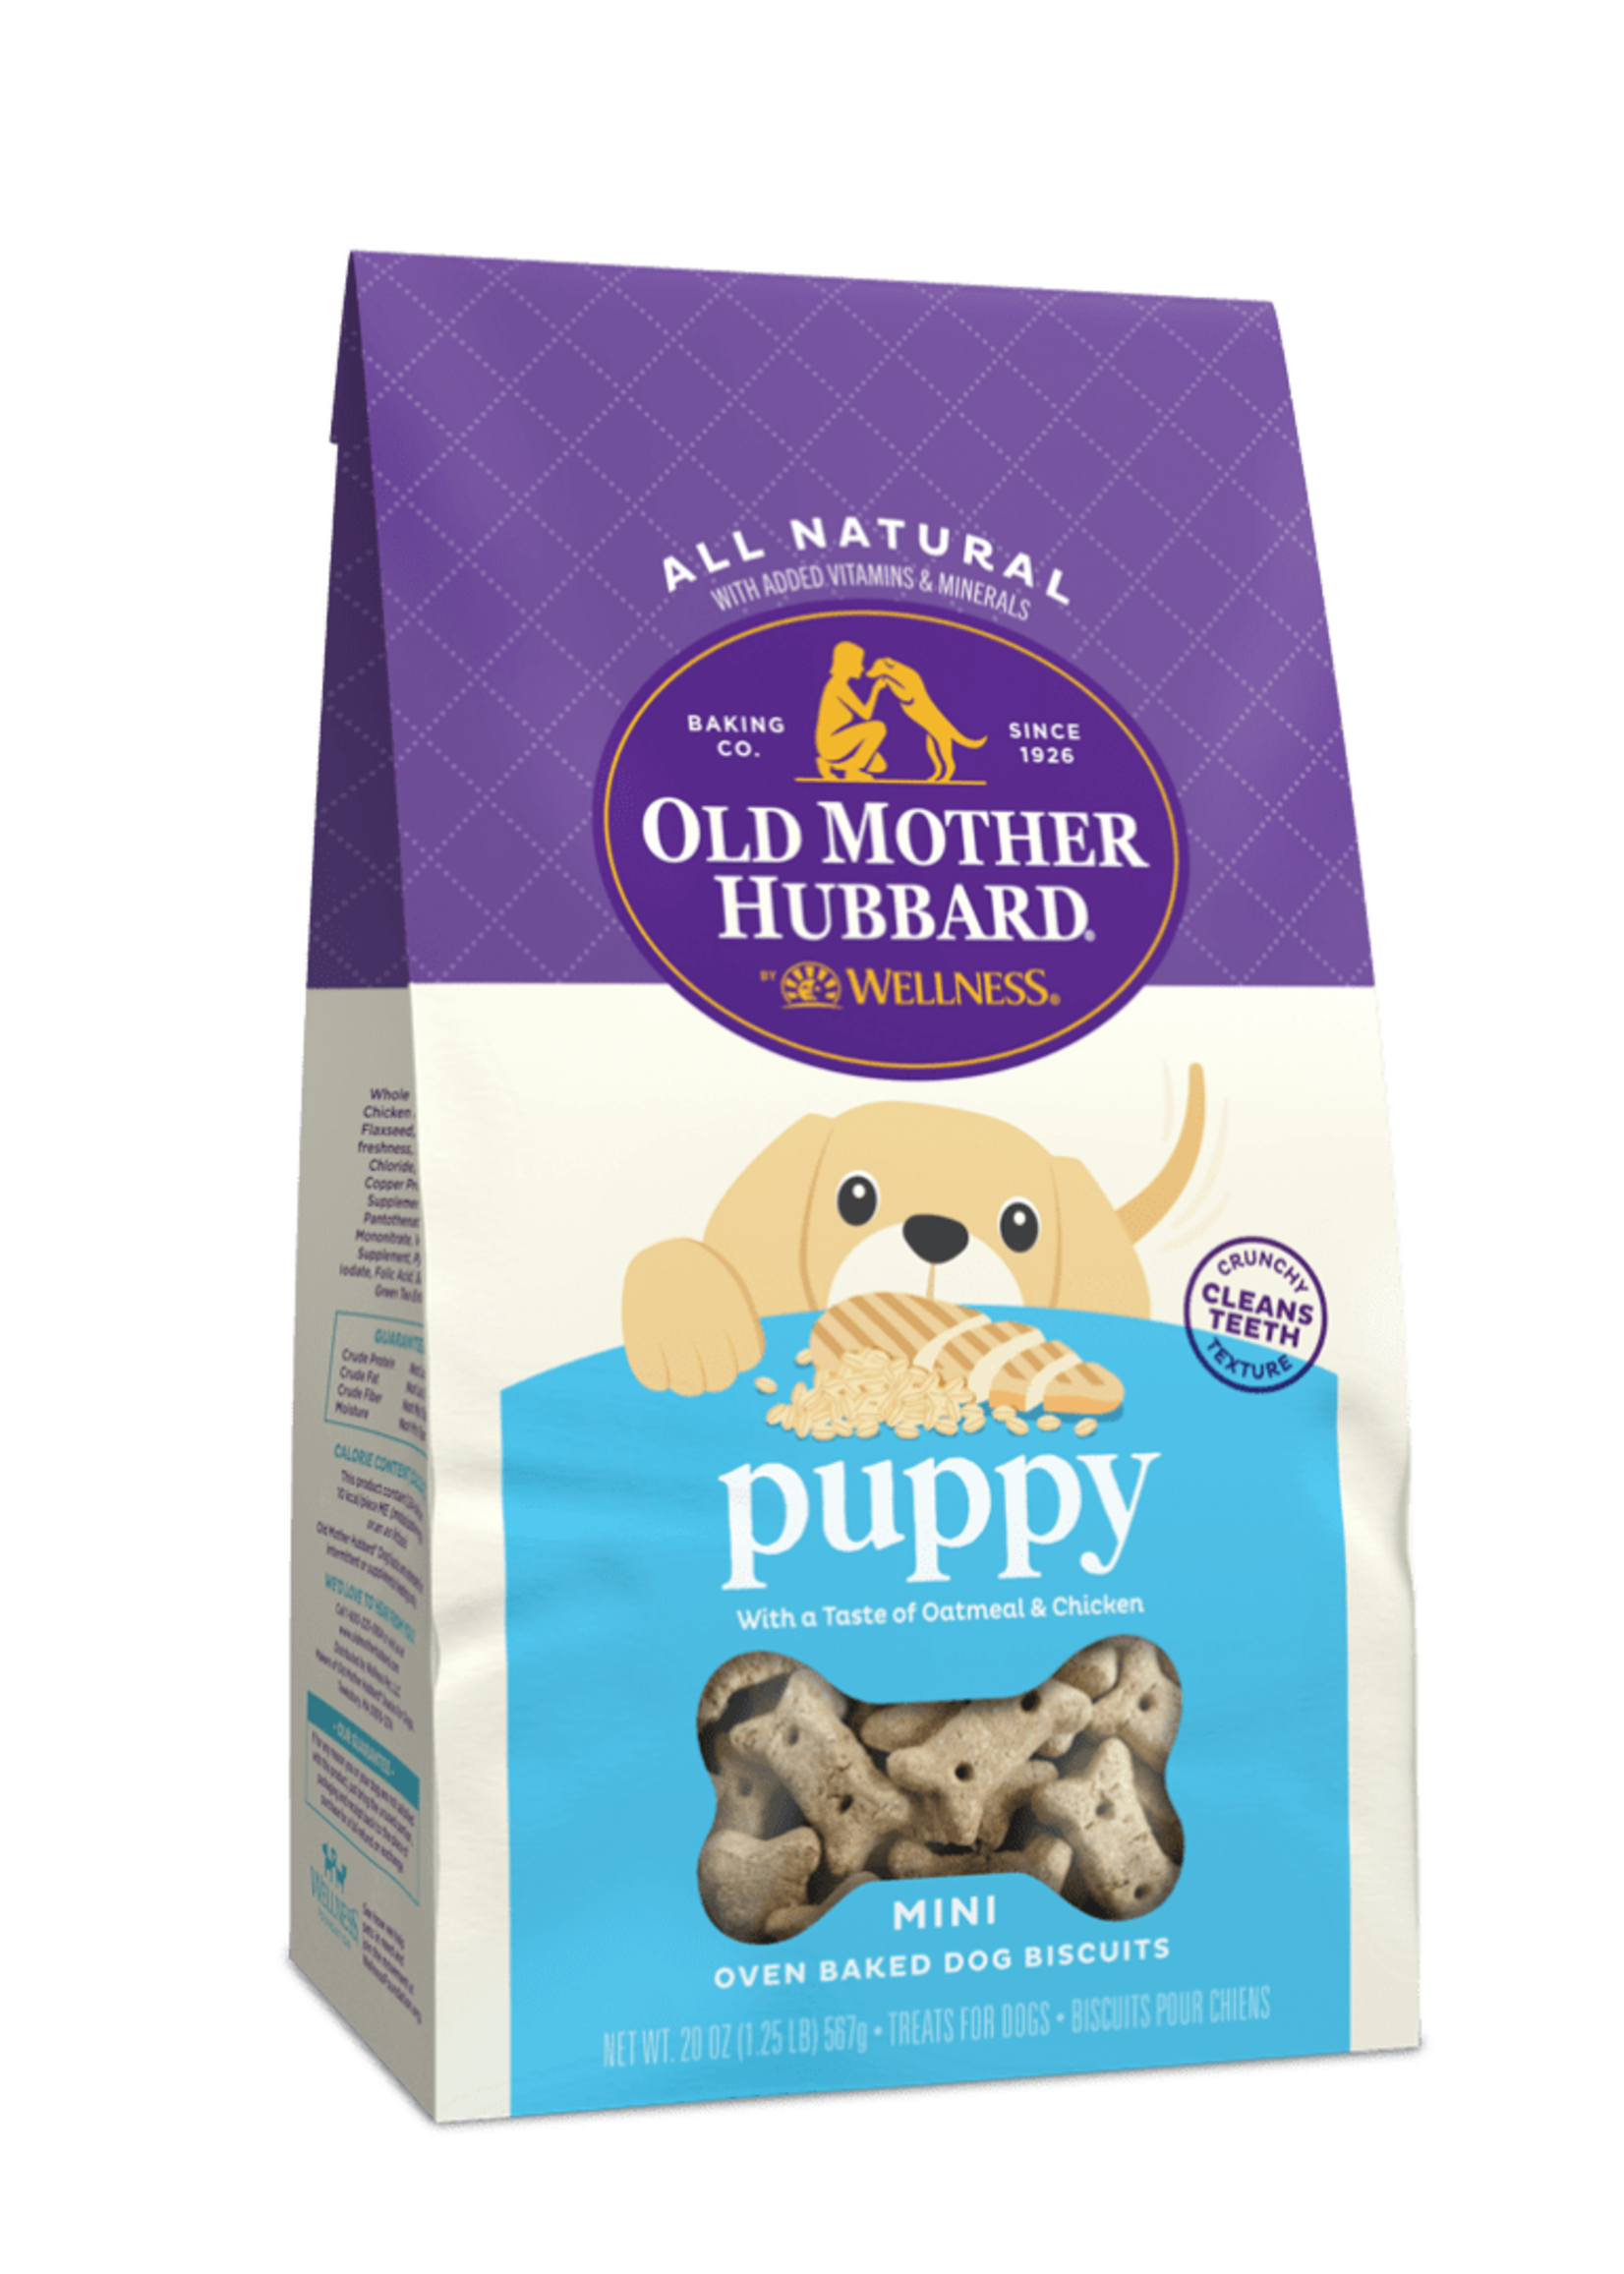 Old Mother Hubbard Old Mother Hubbard Classic Puppy 20oz